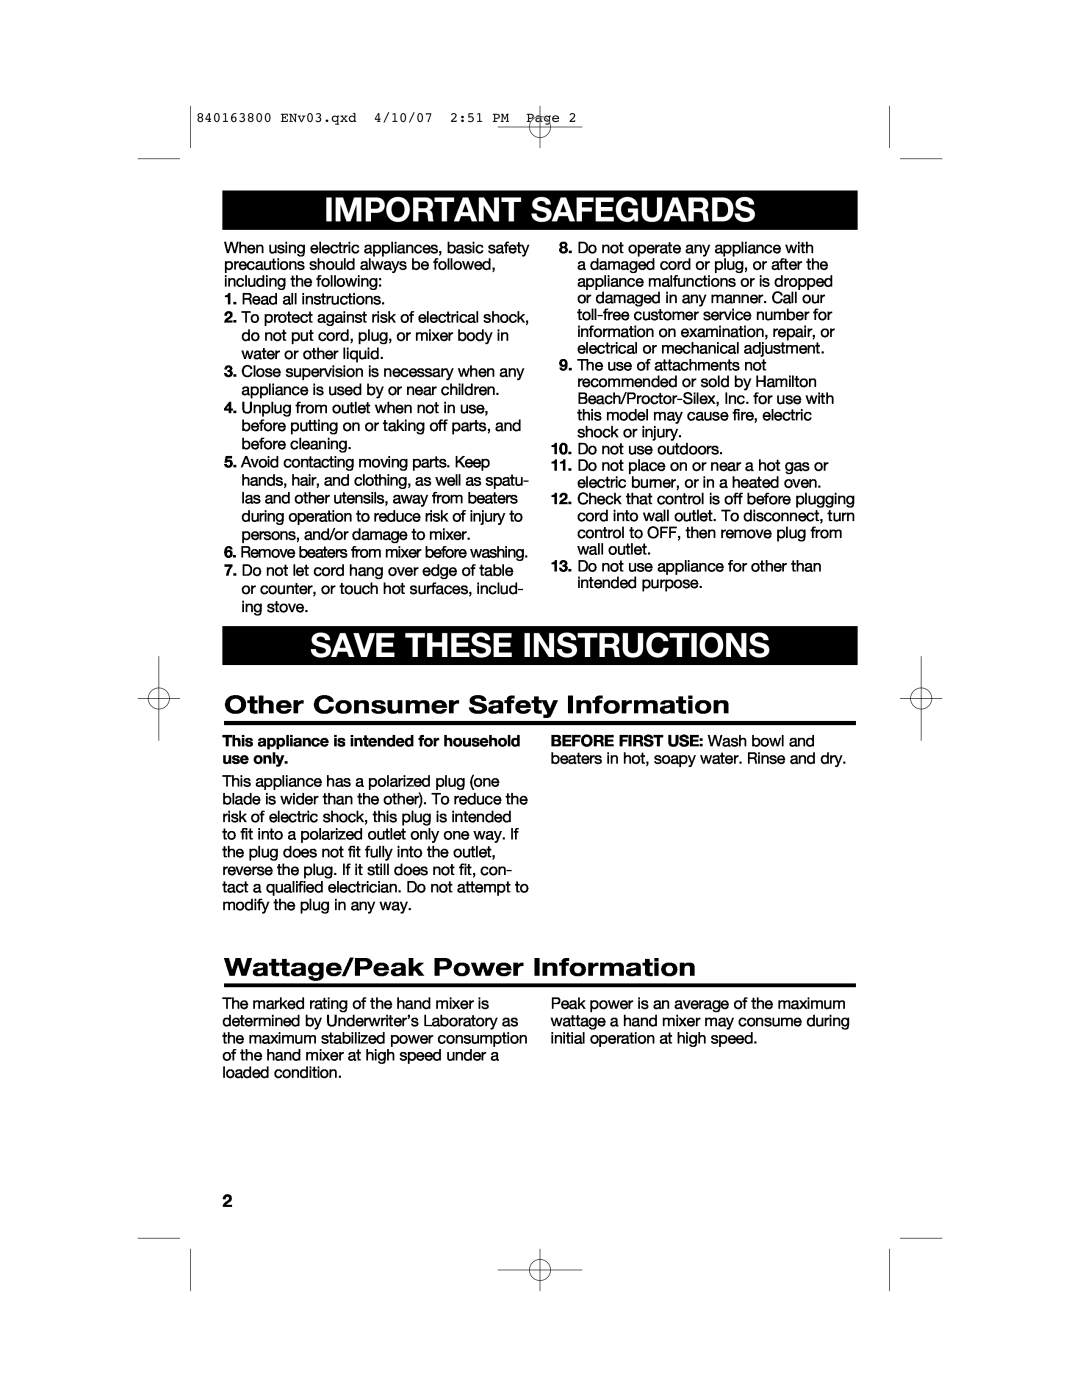 Hamilton Beach 840163800, 62650 manual Important Safeguards, Save These Instructions, Other Consumer Safety Information 